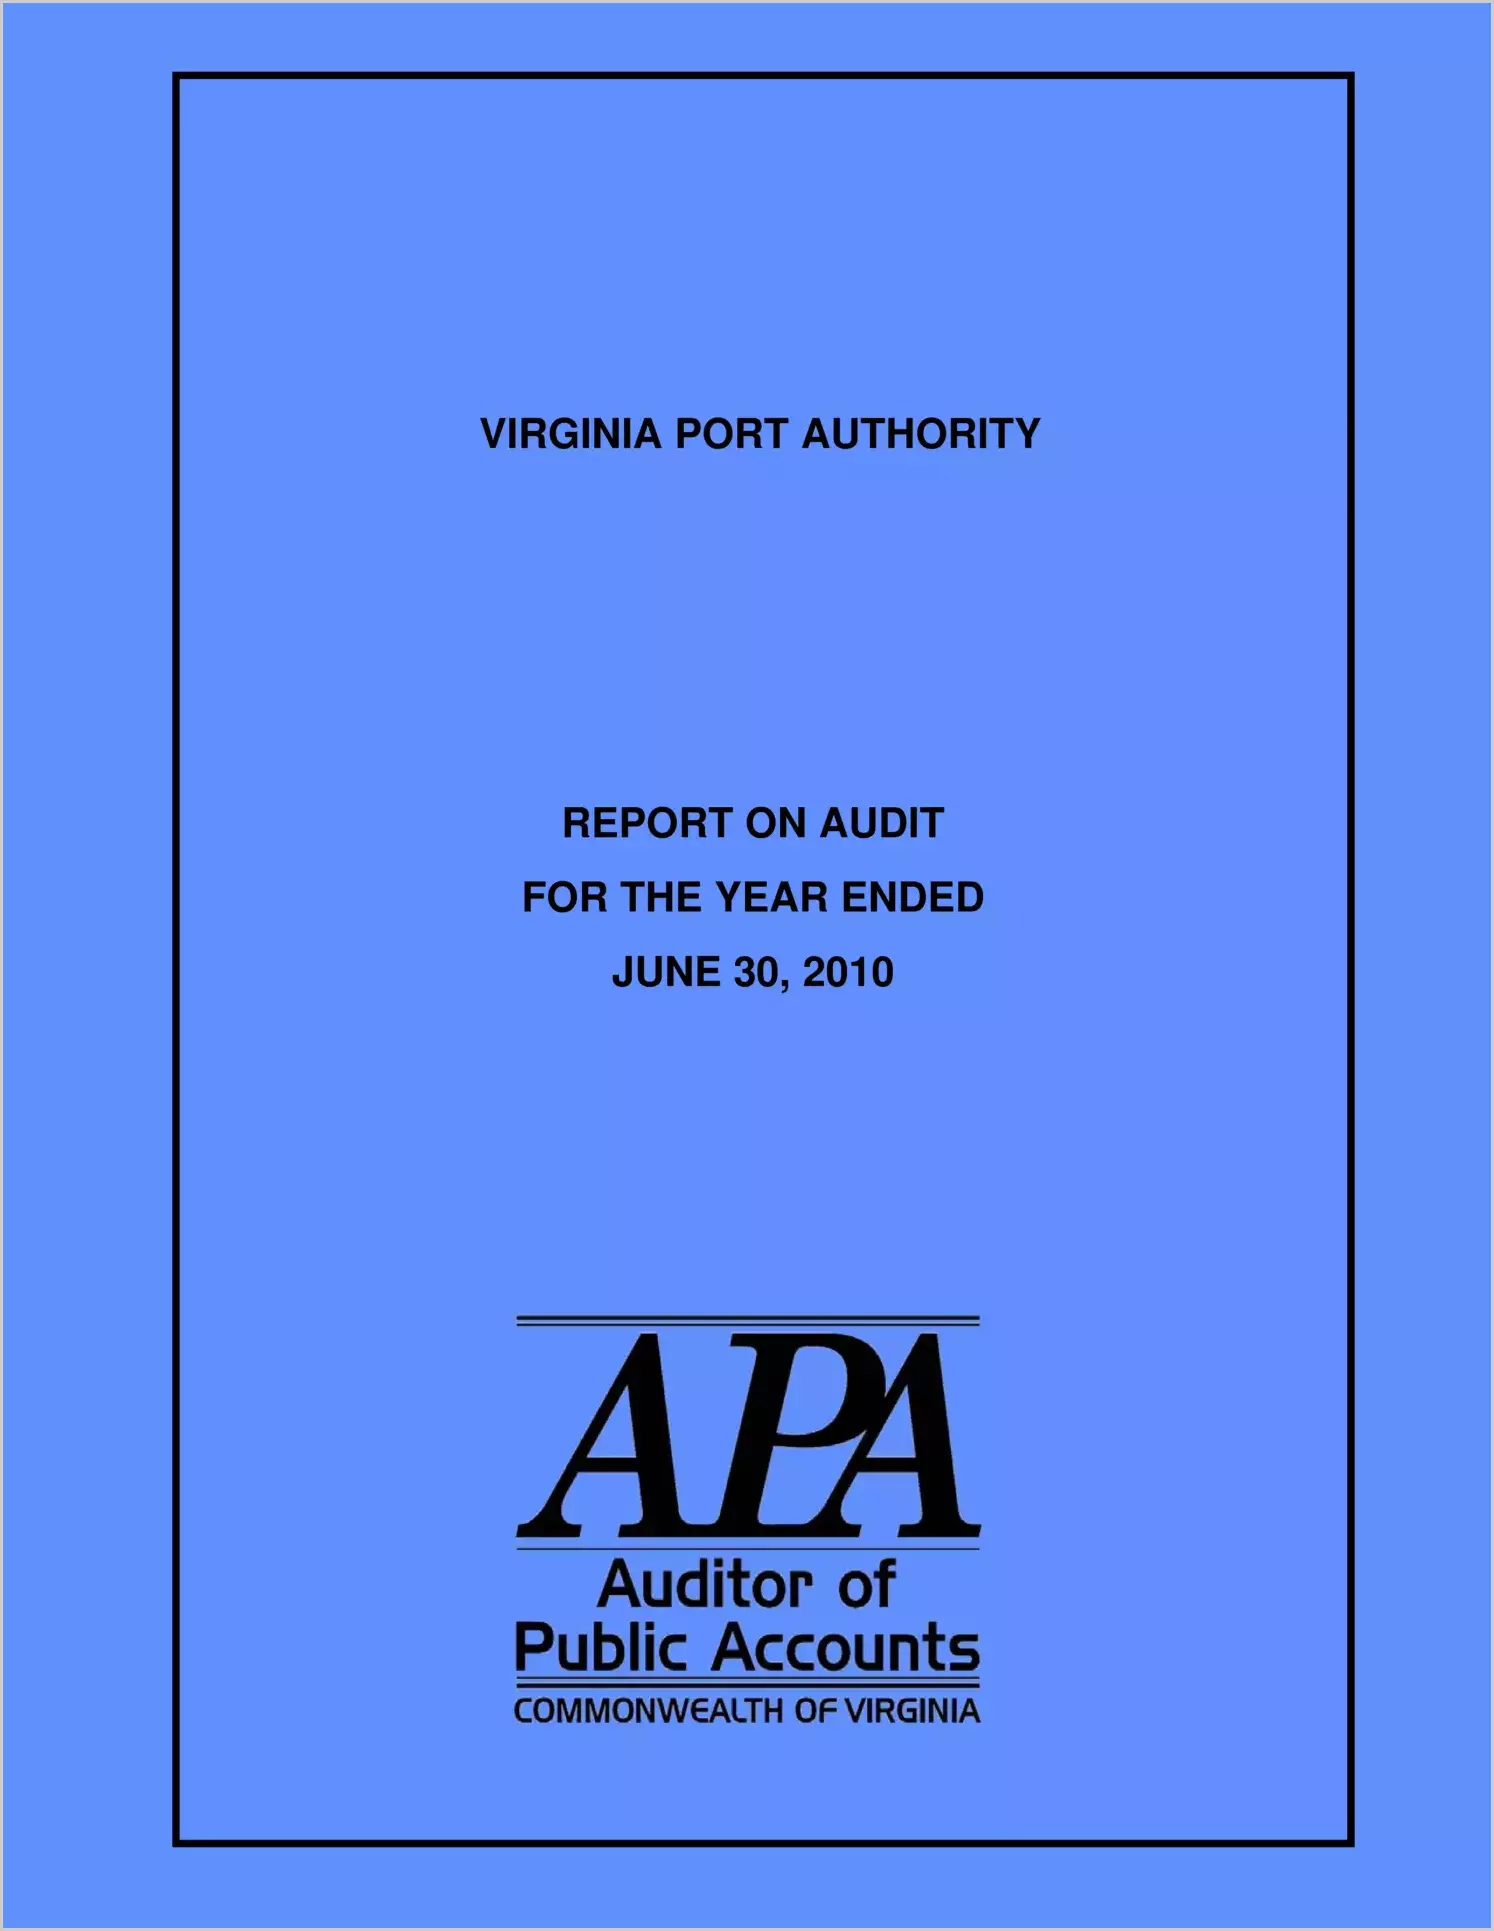 Virginia Port Authority for the year ended June 30, 2010